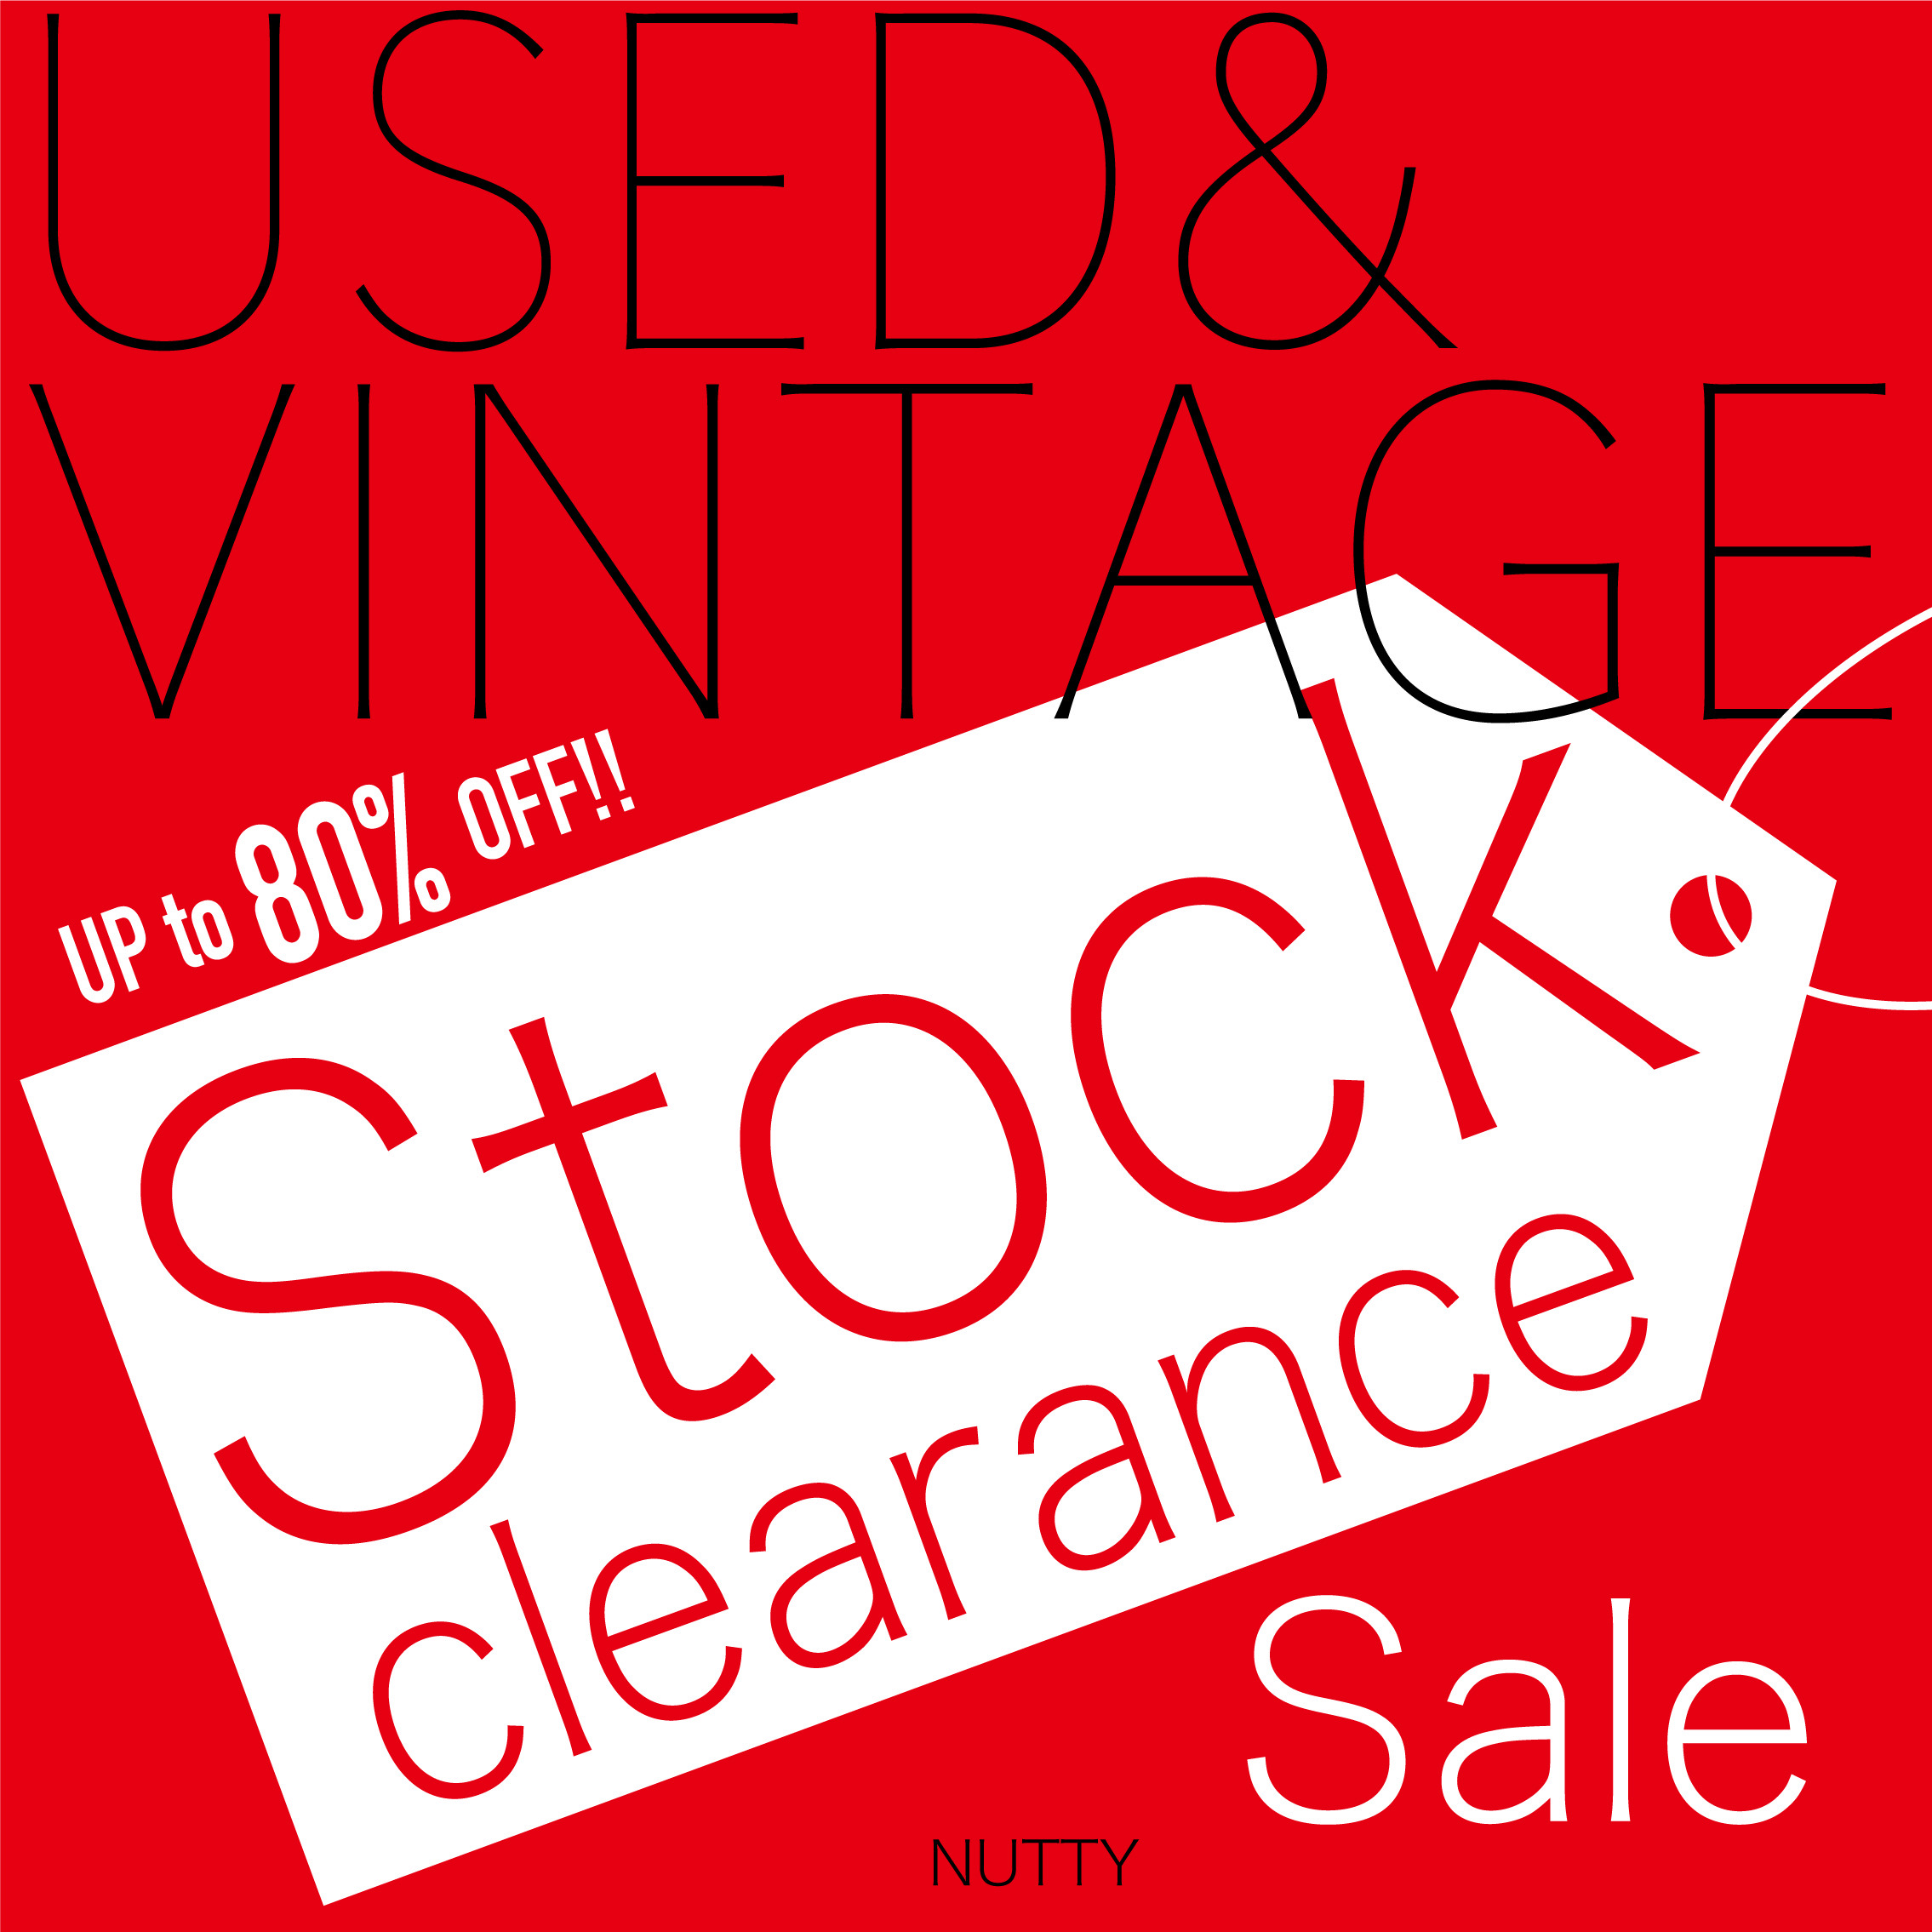 Stock Clearance Saleを6/11より開催いたします